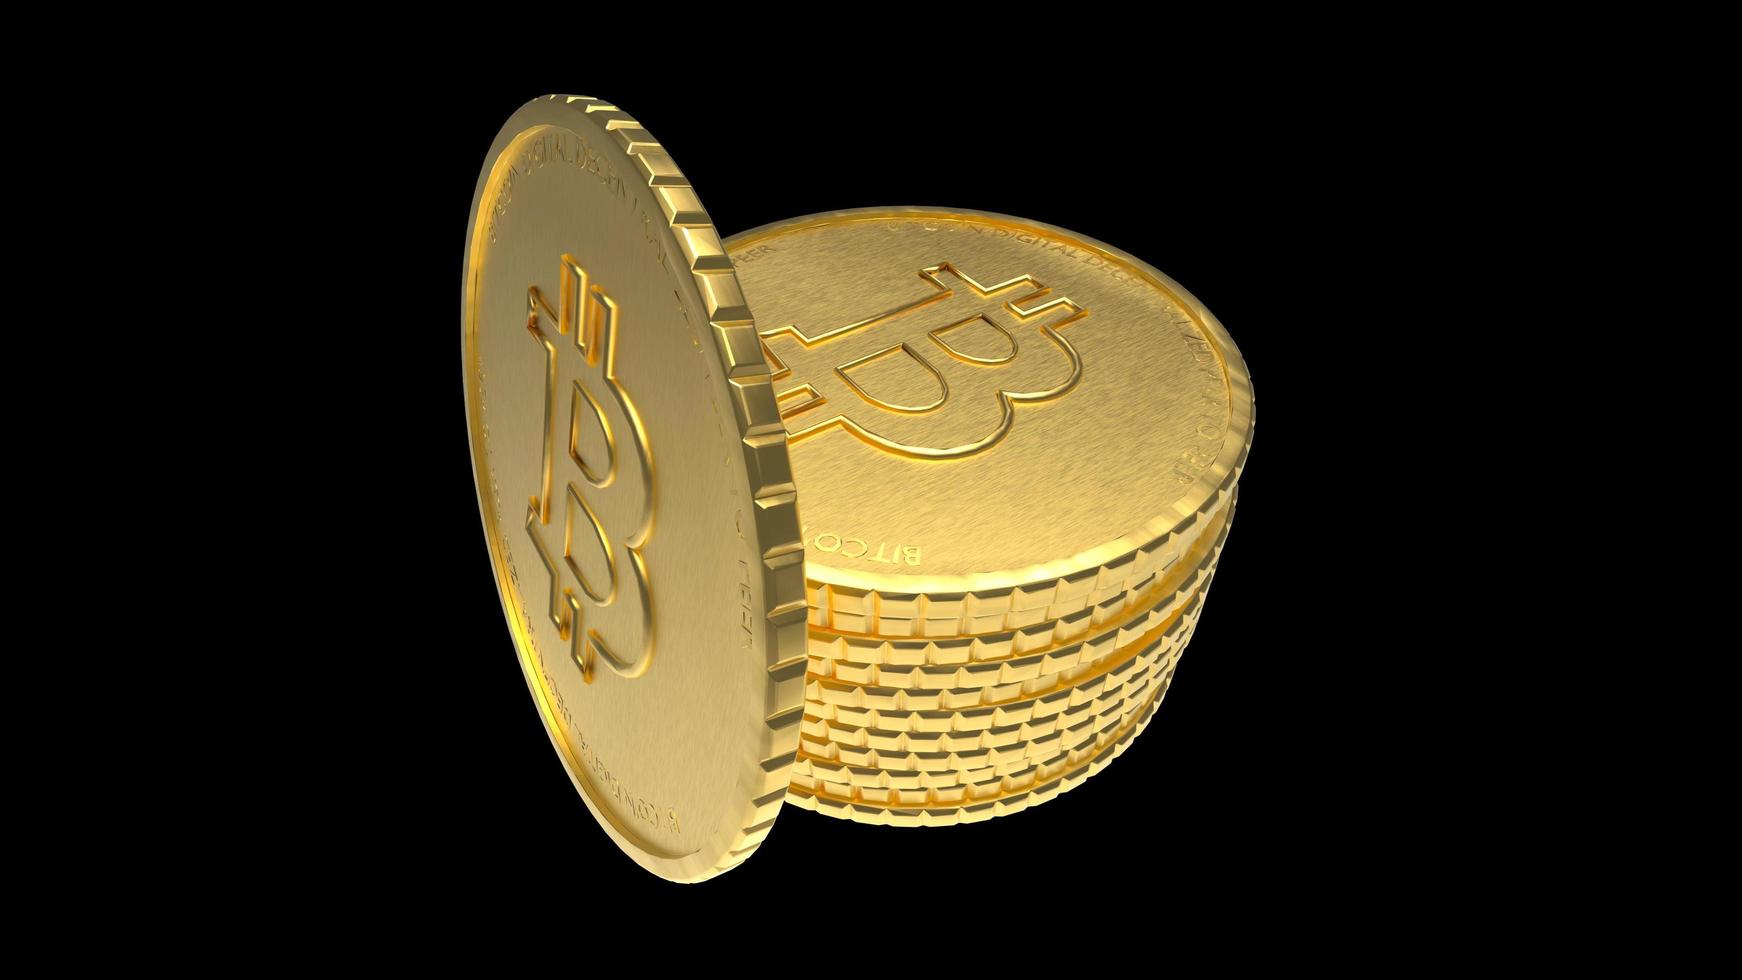 bitcoin gold coin isolated background 3d illustration rendering photo